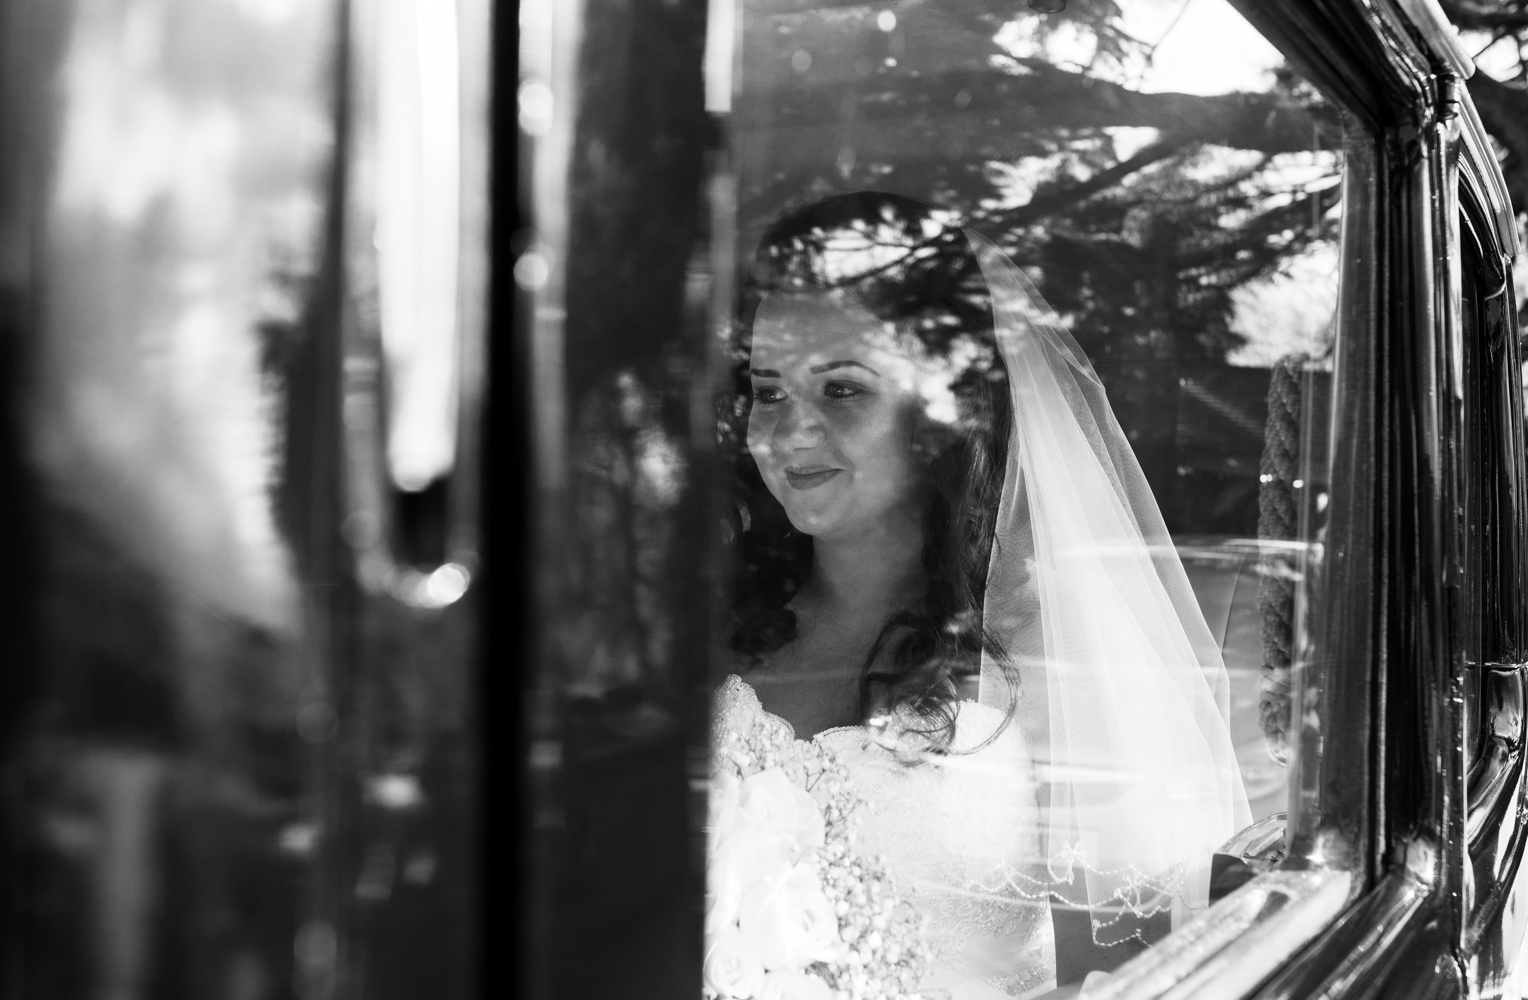 A black and white photograph of the bride sitting in the car prior to her wedding ceremony